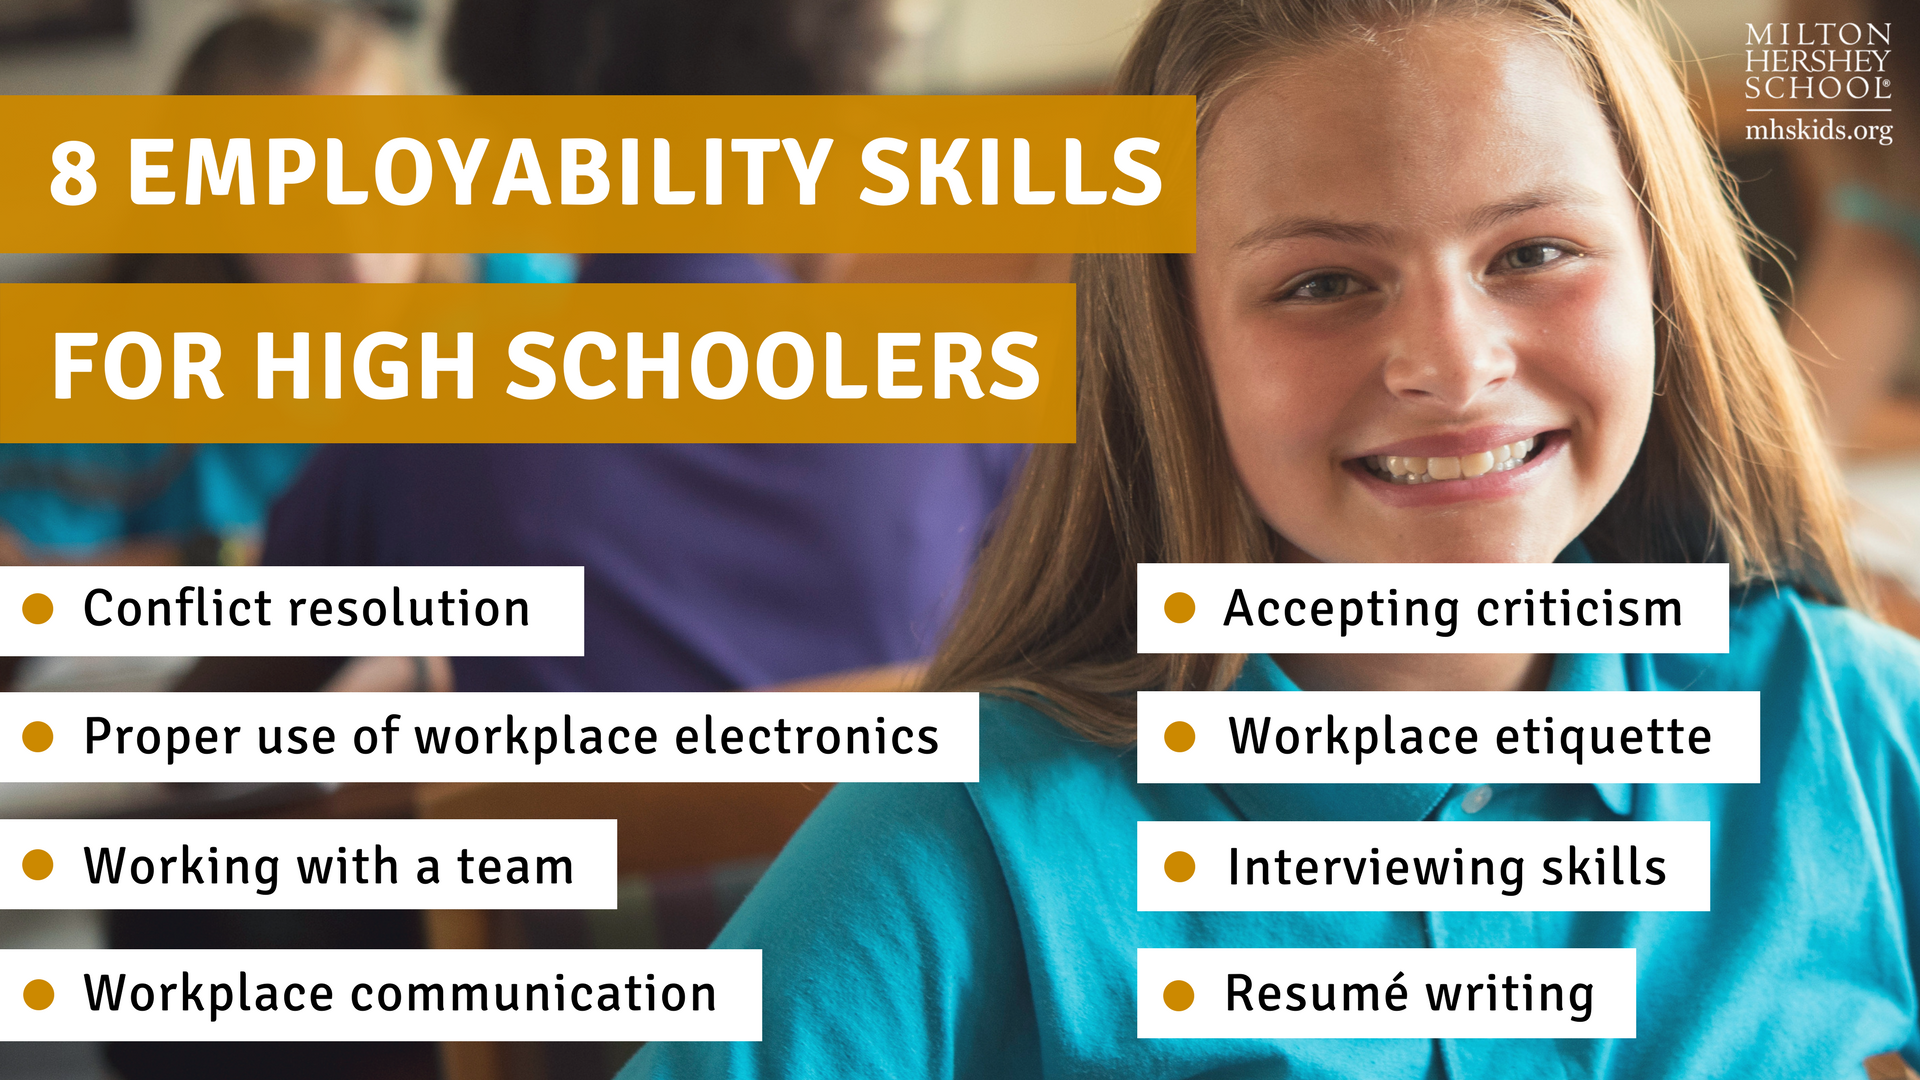 8 employability skills that prepare high schoolers for the 21st